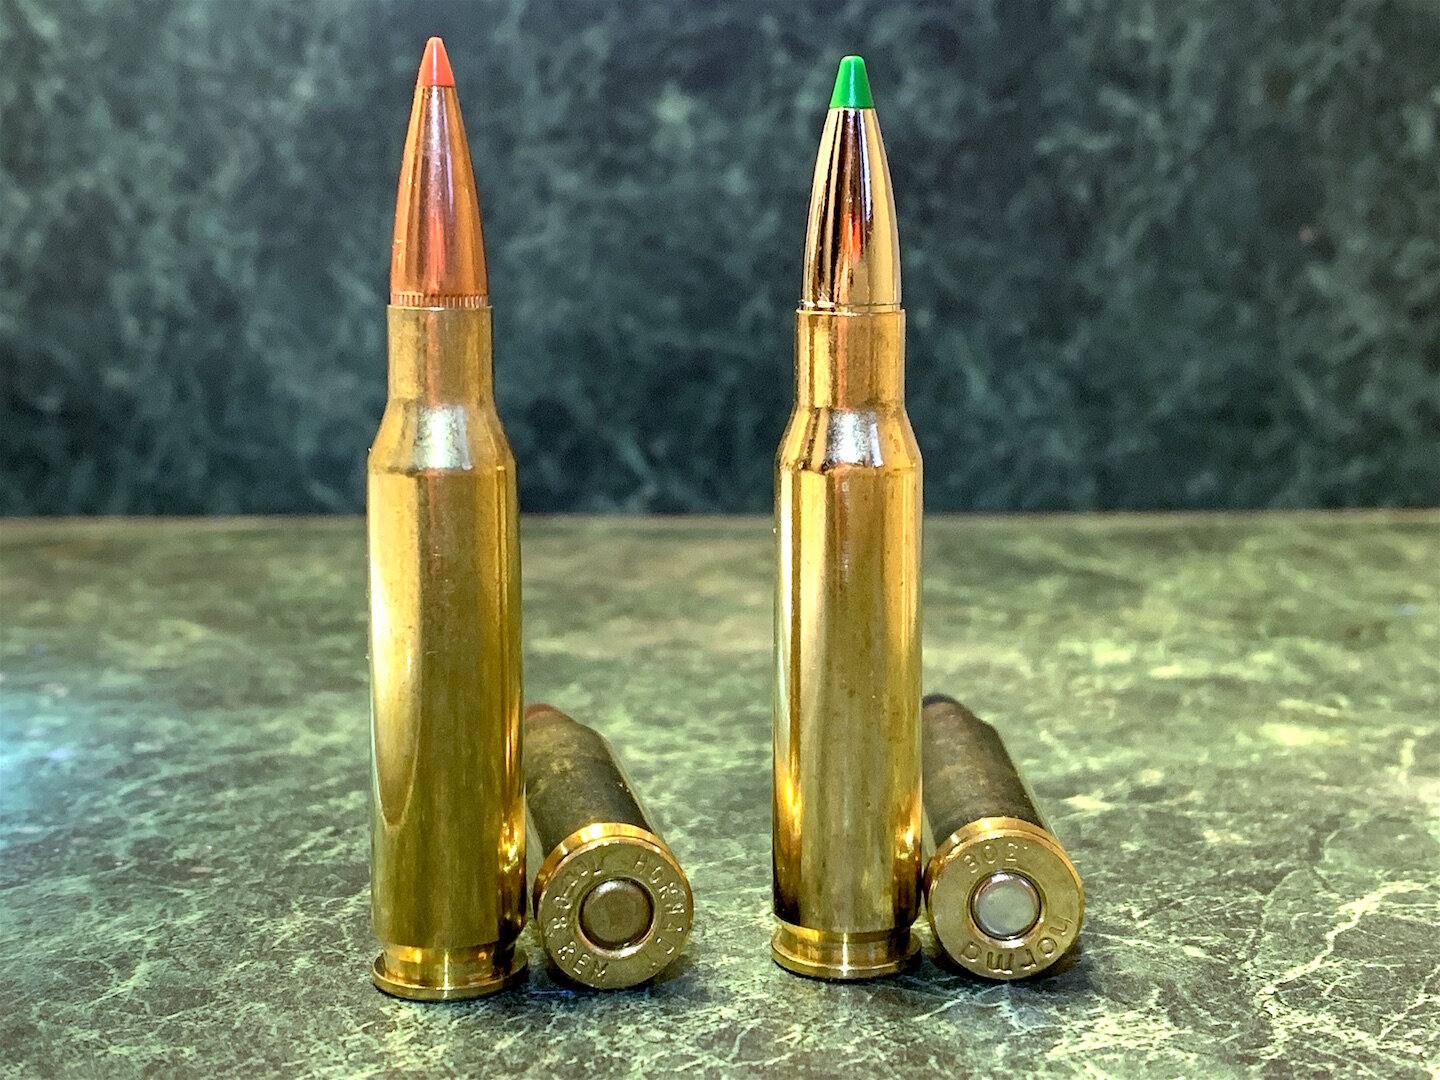 Image shows 7mm-08 and 308 cartridges being assessd via the Optimum Game We...